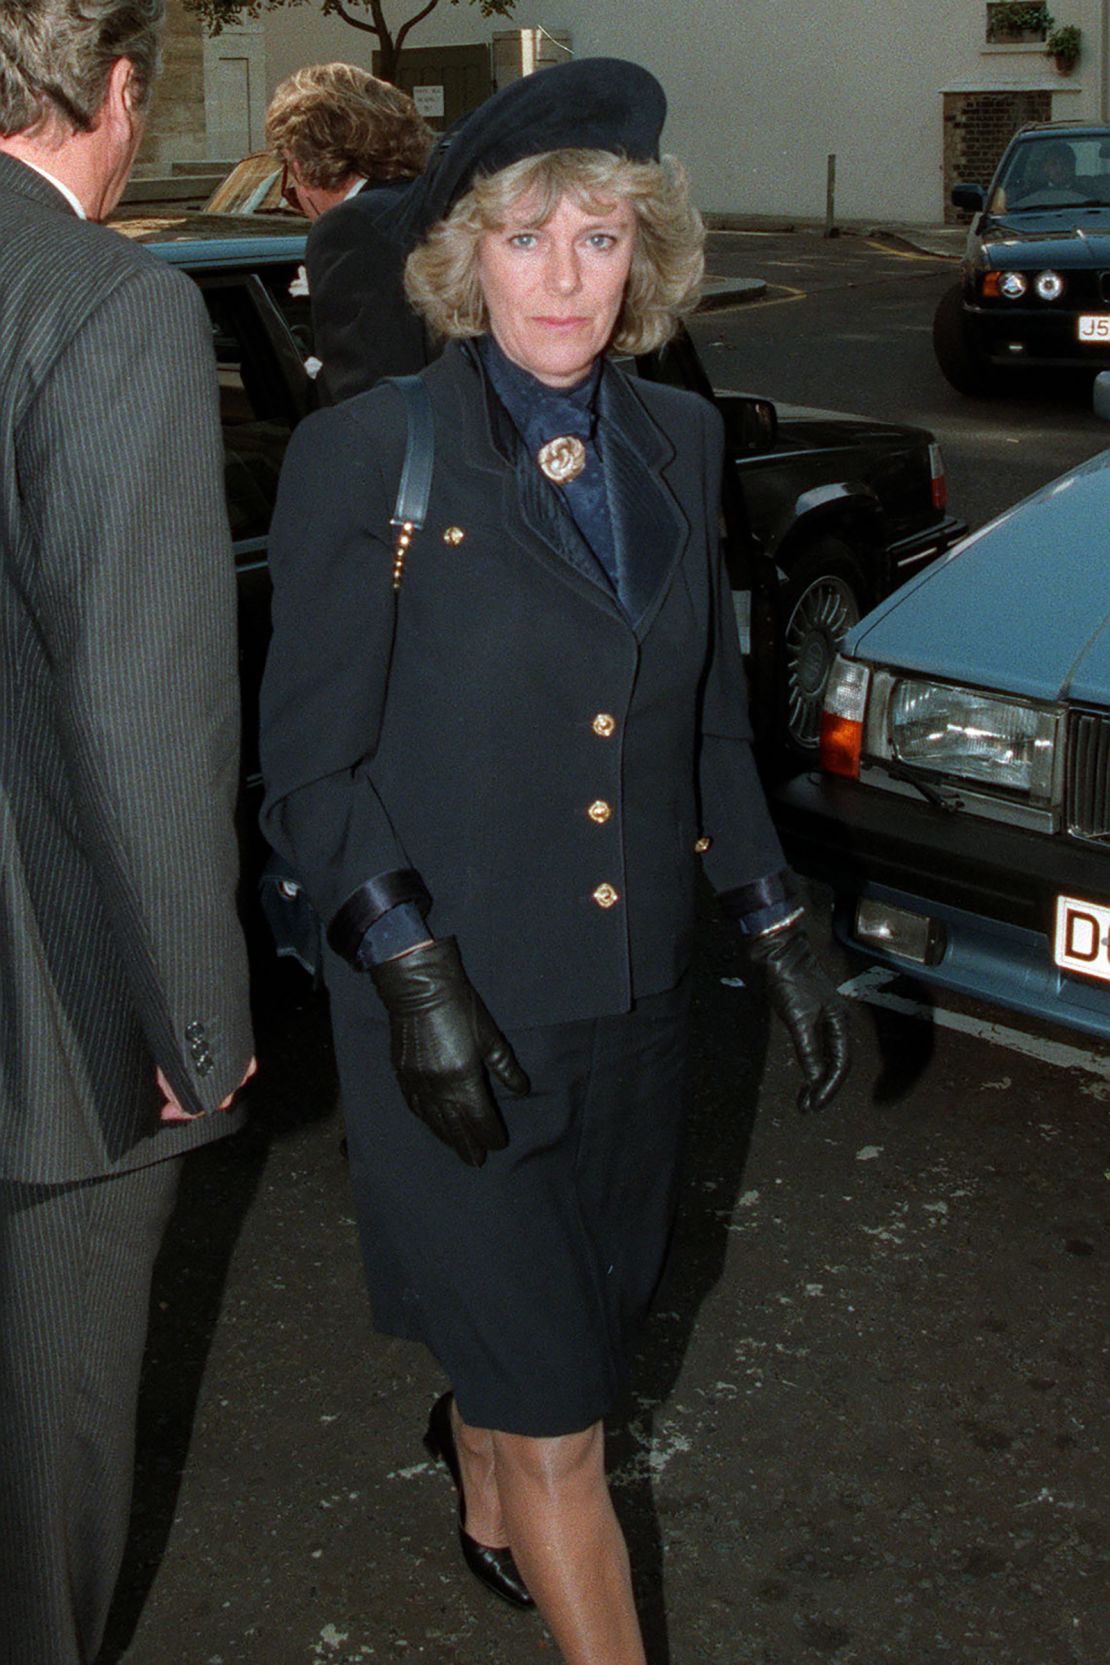 For her mother's funeral on June 6 1994, Camilla wore an elegant black skirt suit with gold detailing, a navy shirt and a black beret.